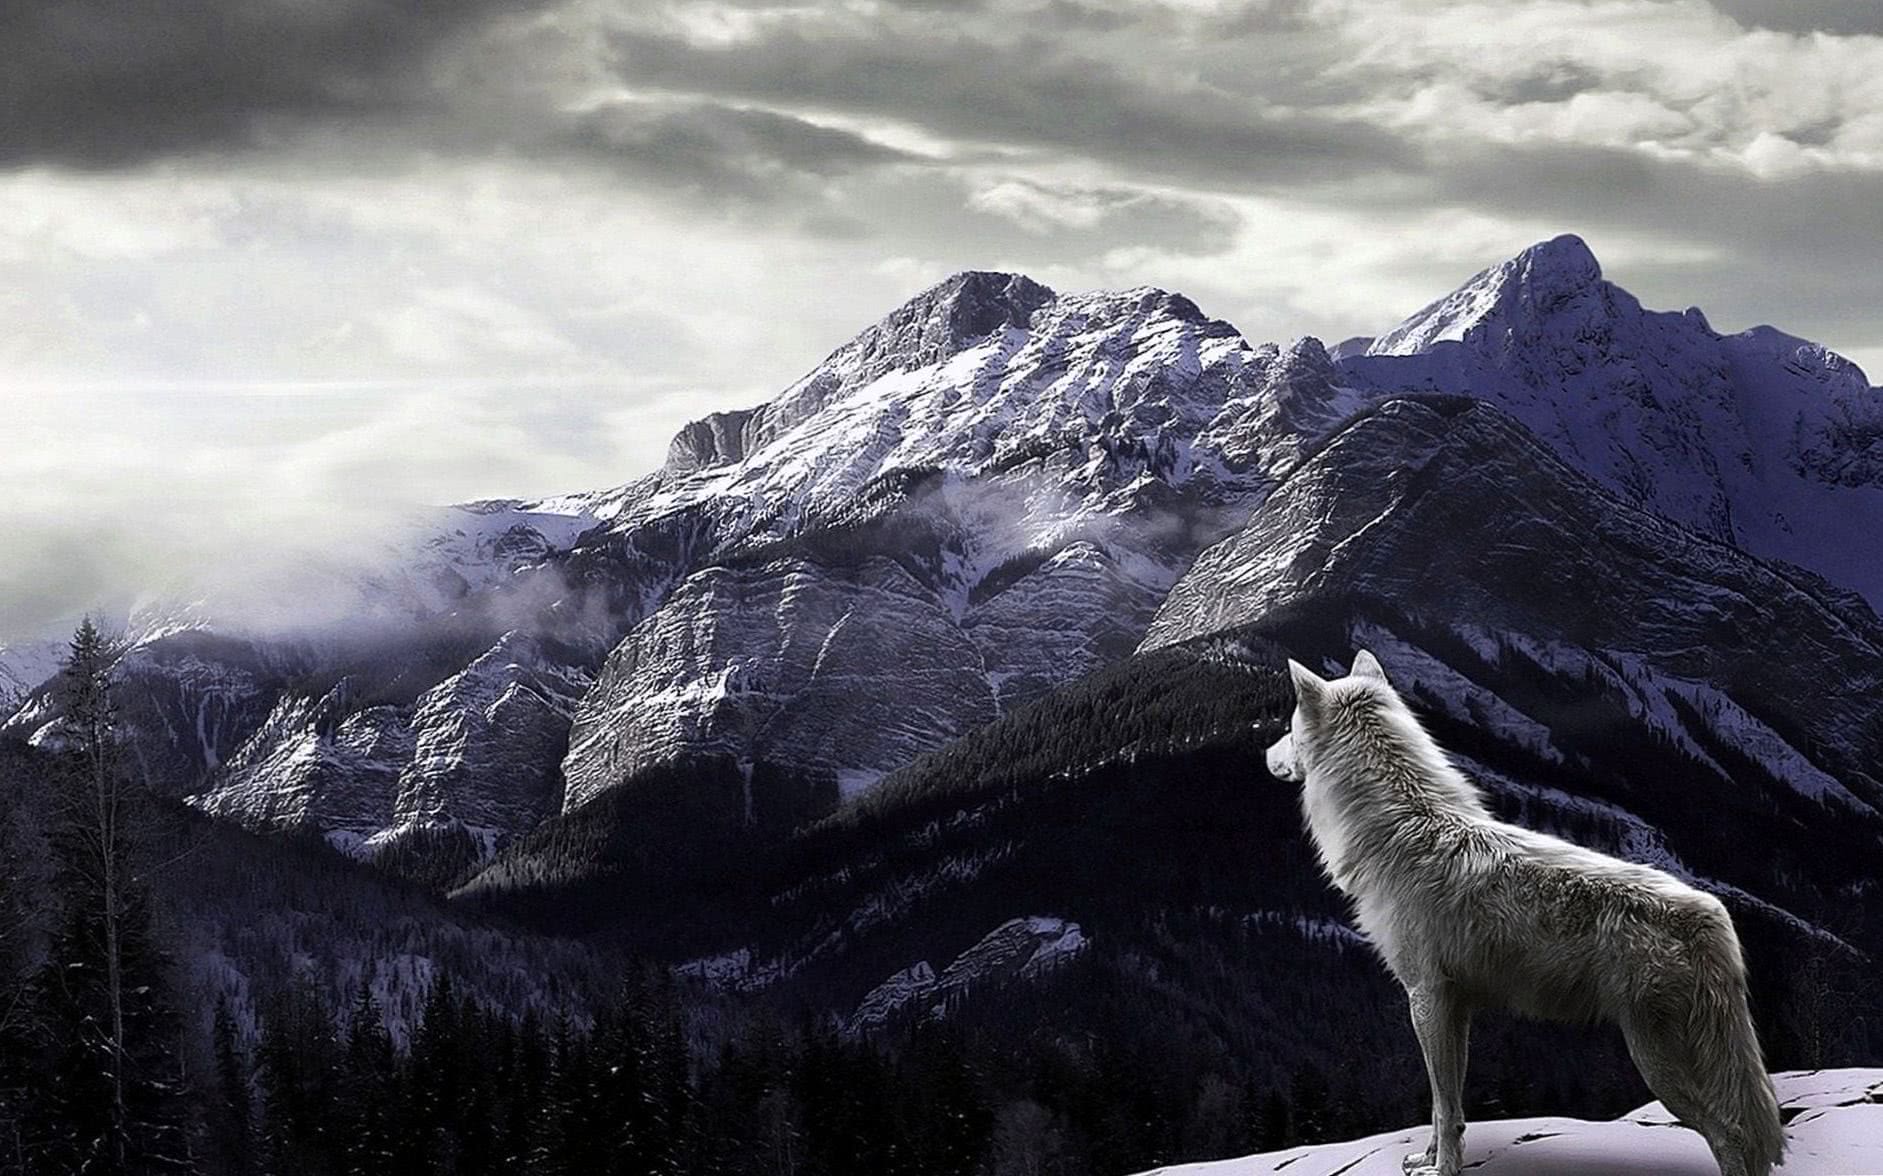 Wolf Wallpapers Computer